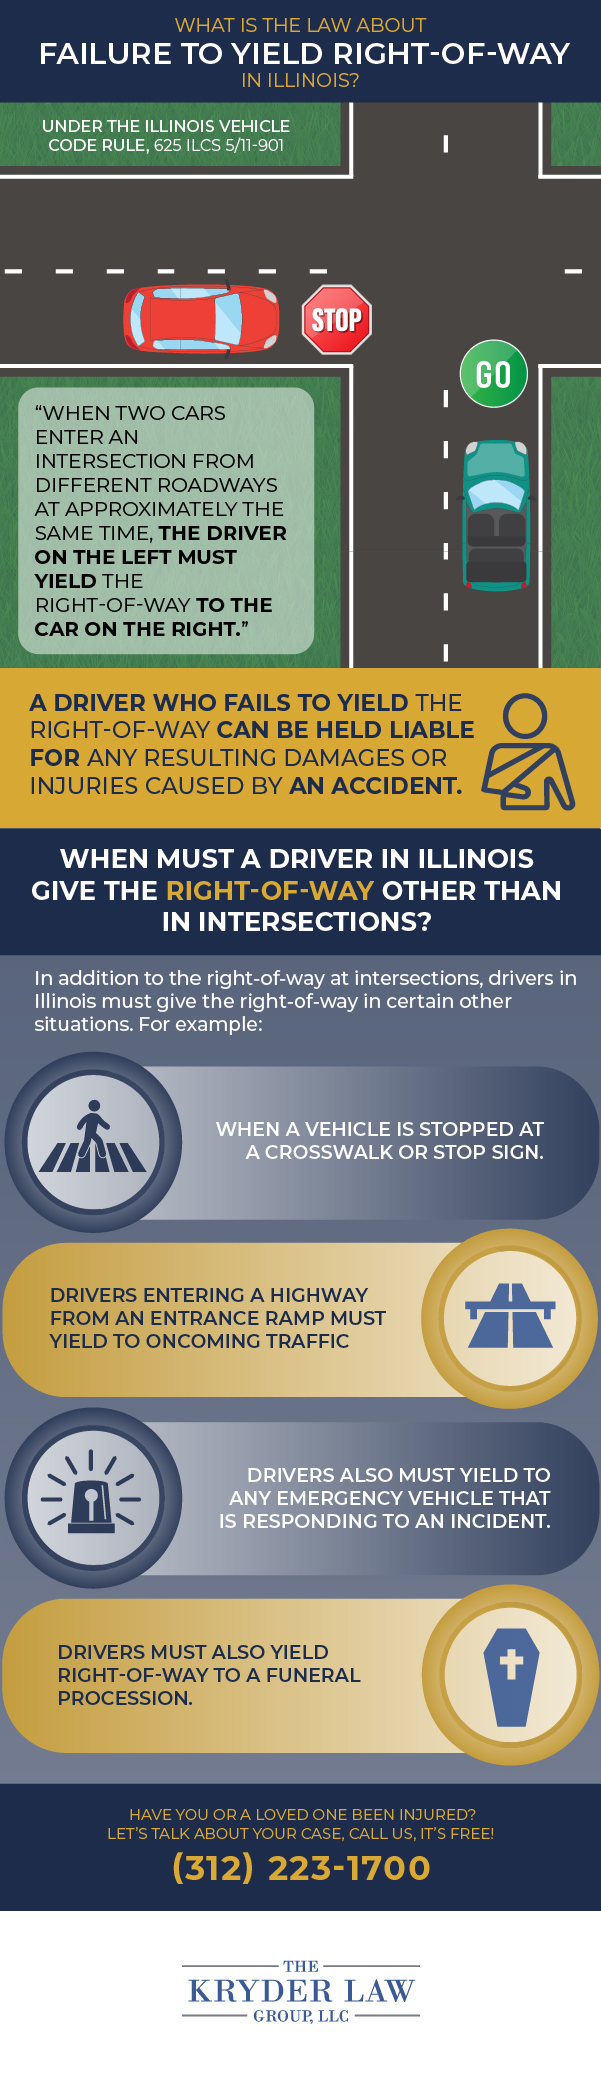 What Is The Law About Failure to Yield Right-of-Way in Illinois?